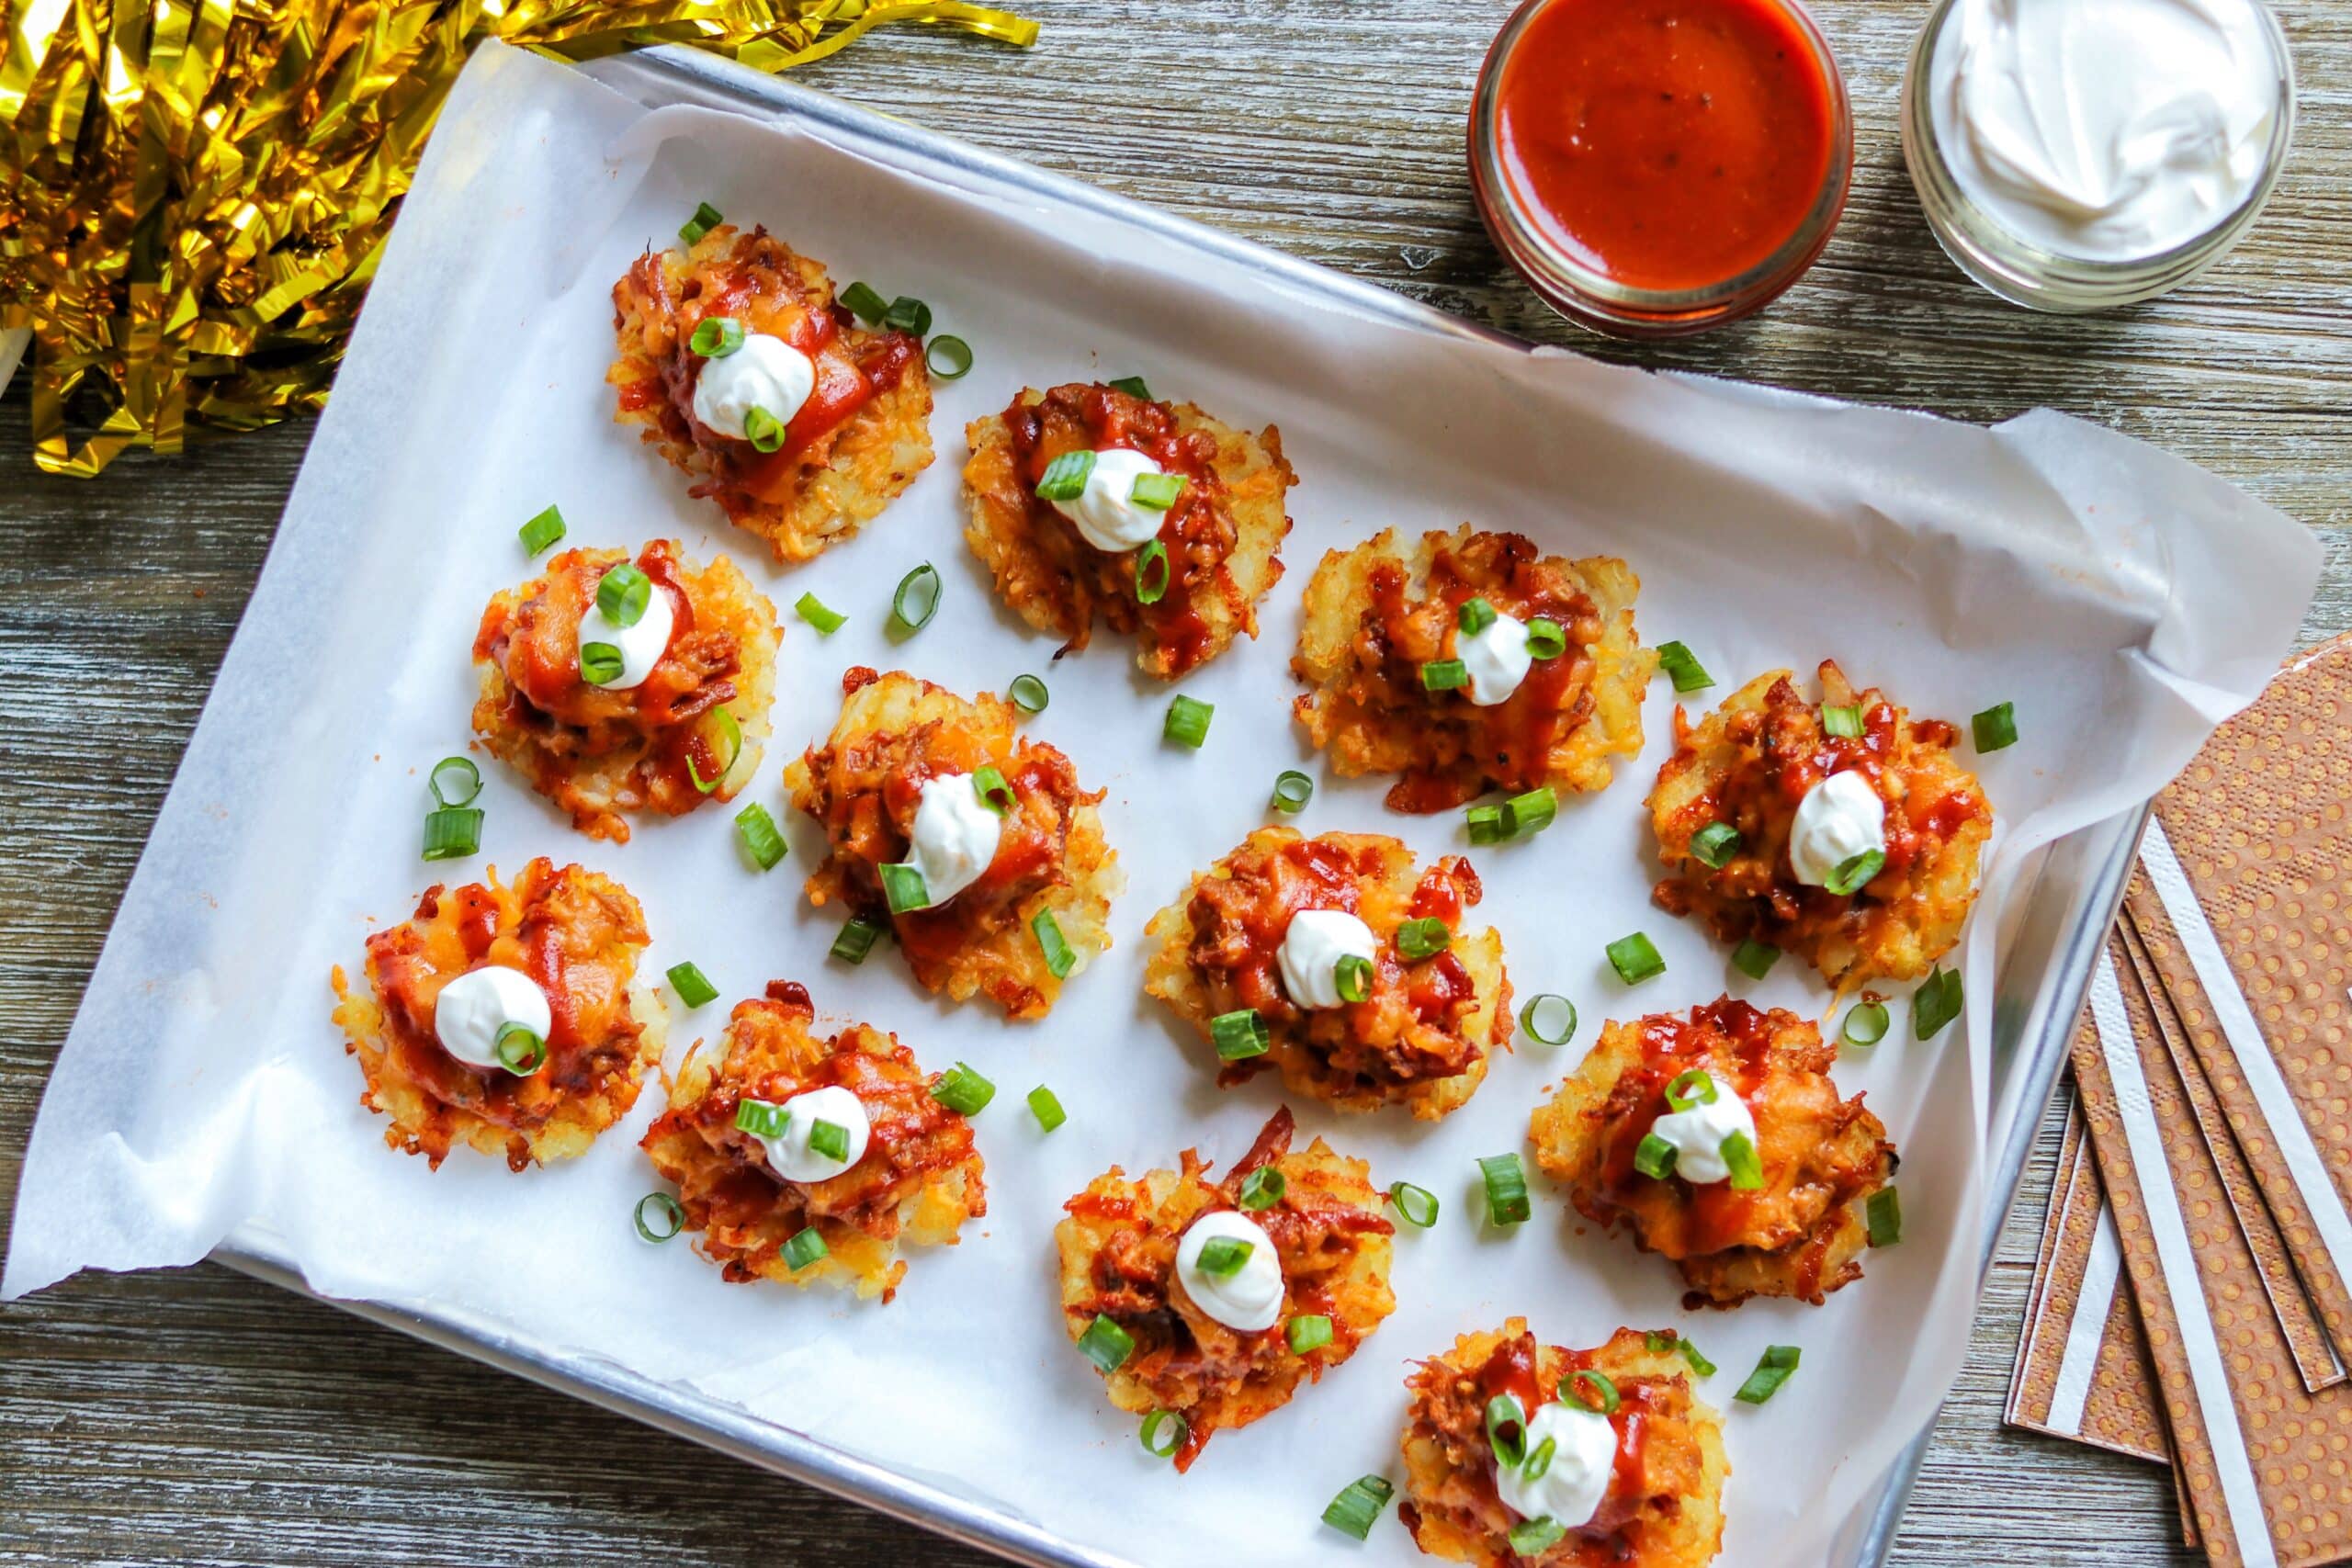 Tater Tot Appetizers - Super Crispy Tot Potato “Skins” with Pulled Pork